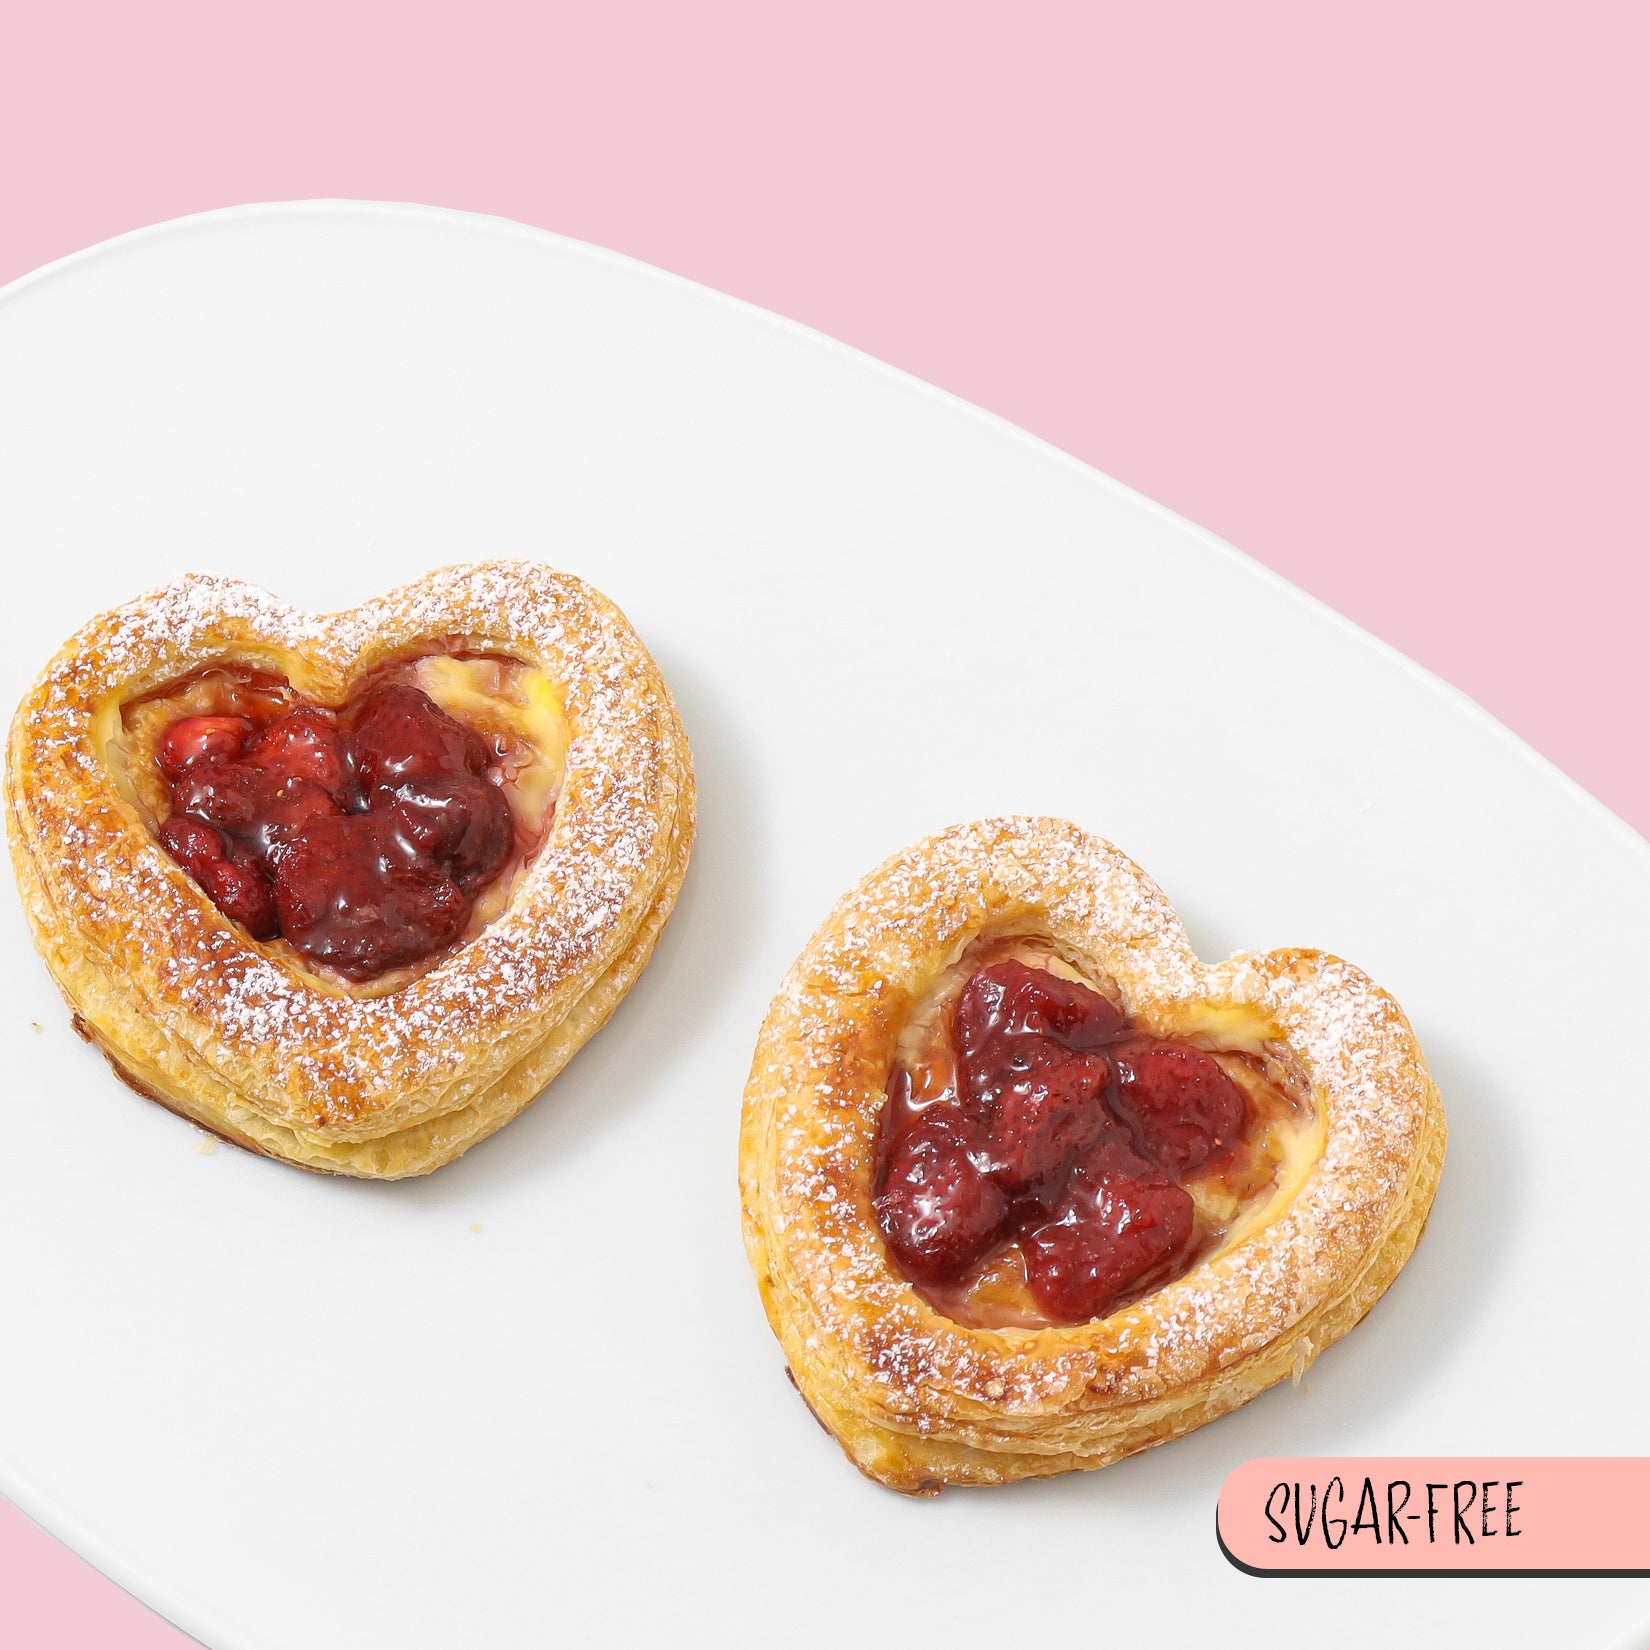 Indulge in our decadent Sugar-Free Strawberry Danish Sweethearts for a guilt-free Valentine's treat